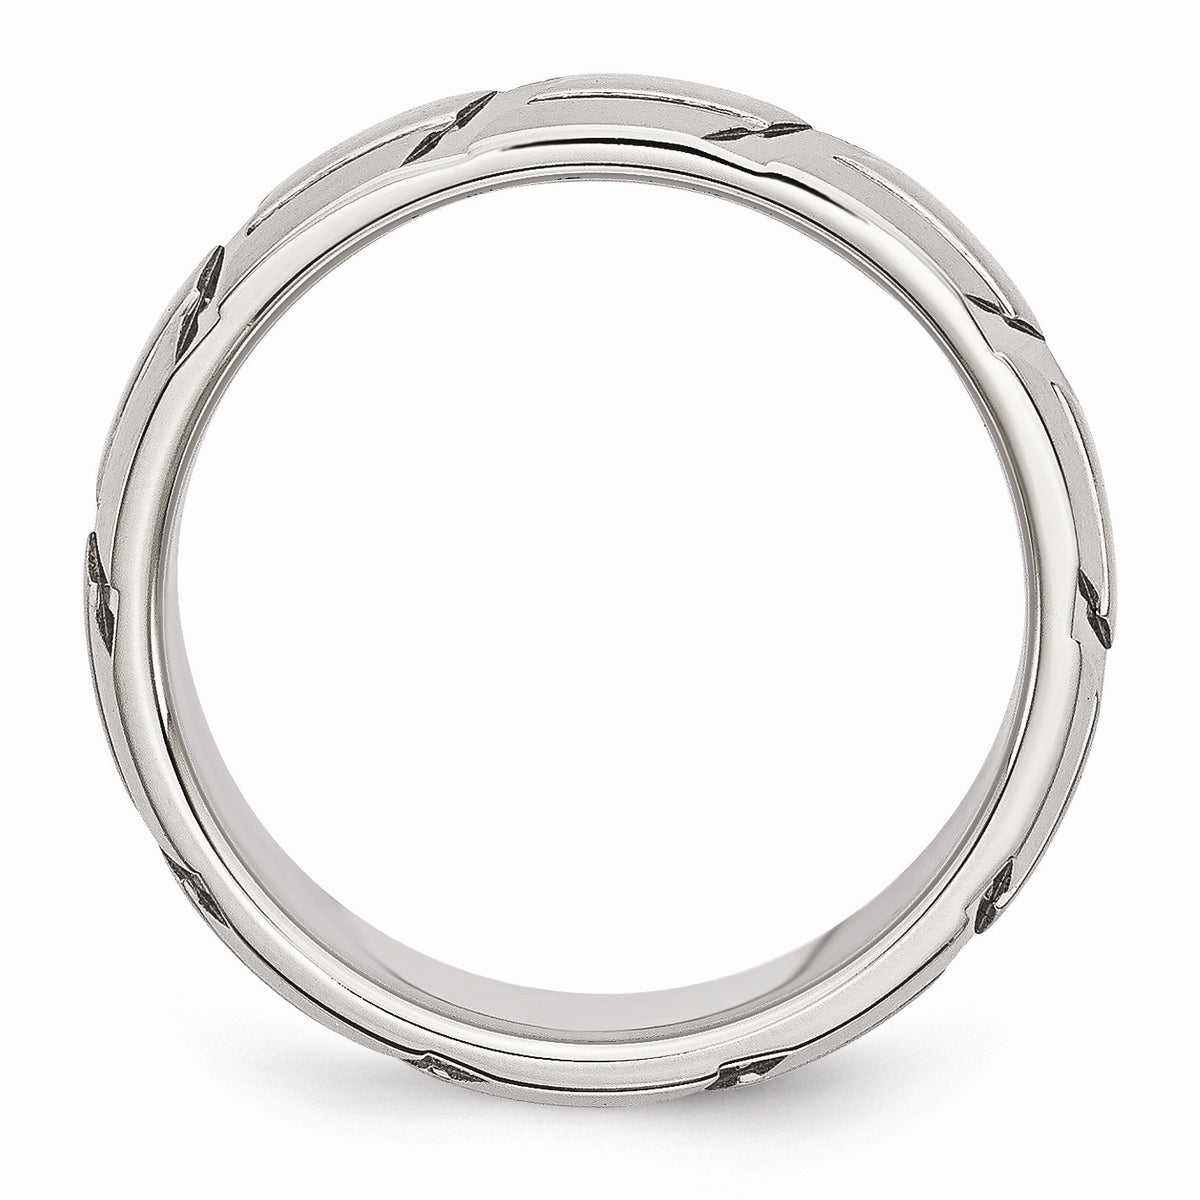 Alternate view of the Stainless Steel Grooved 8mm Dual Finished Comfort Fit Band by The Black Bow Jewelry Co.